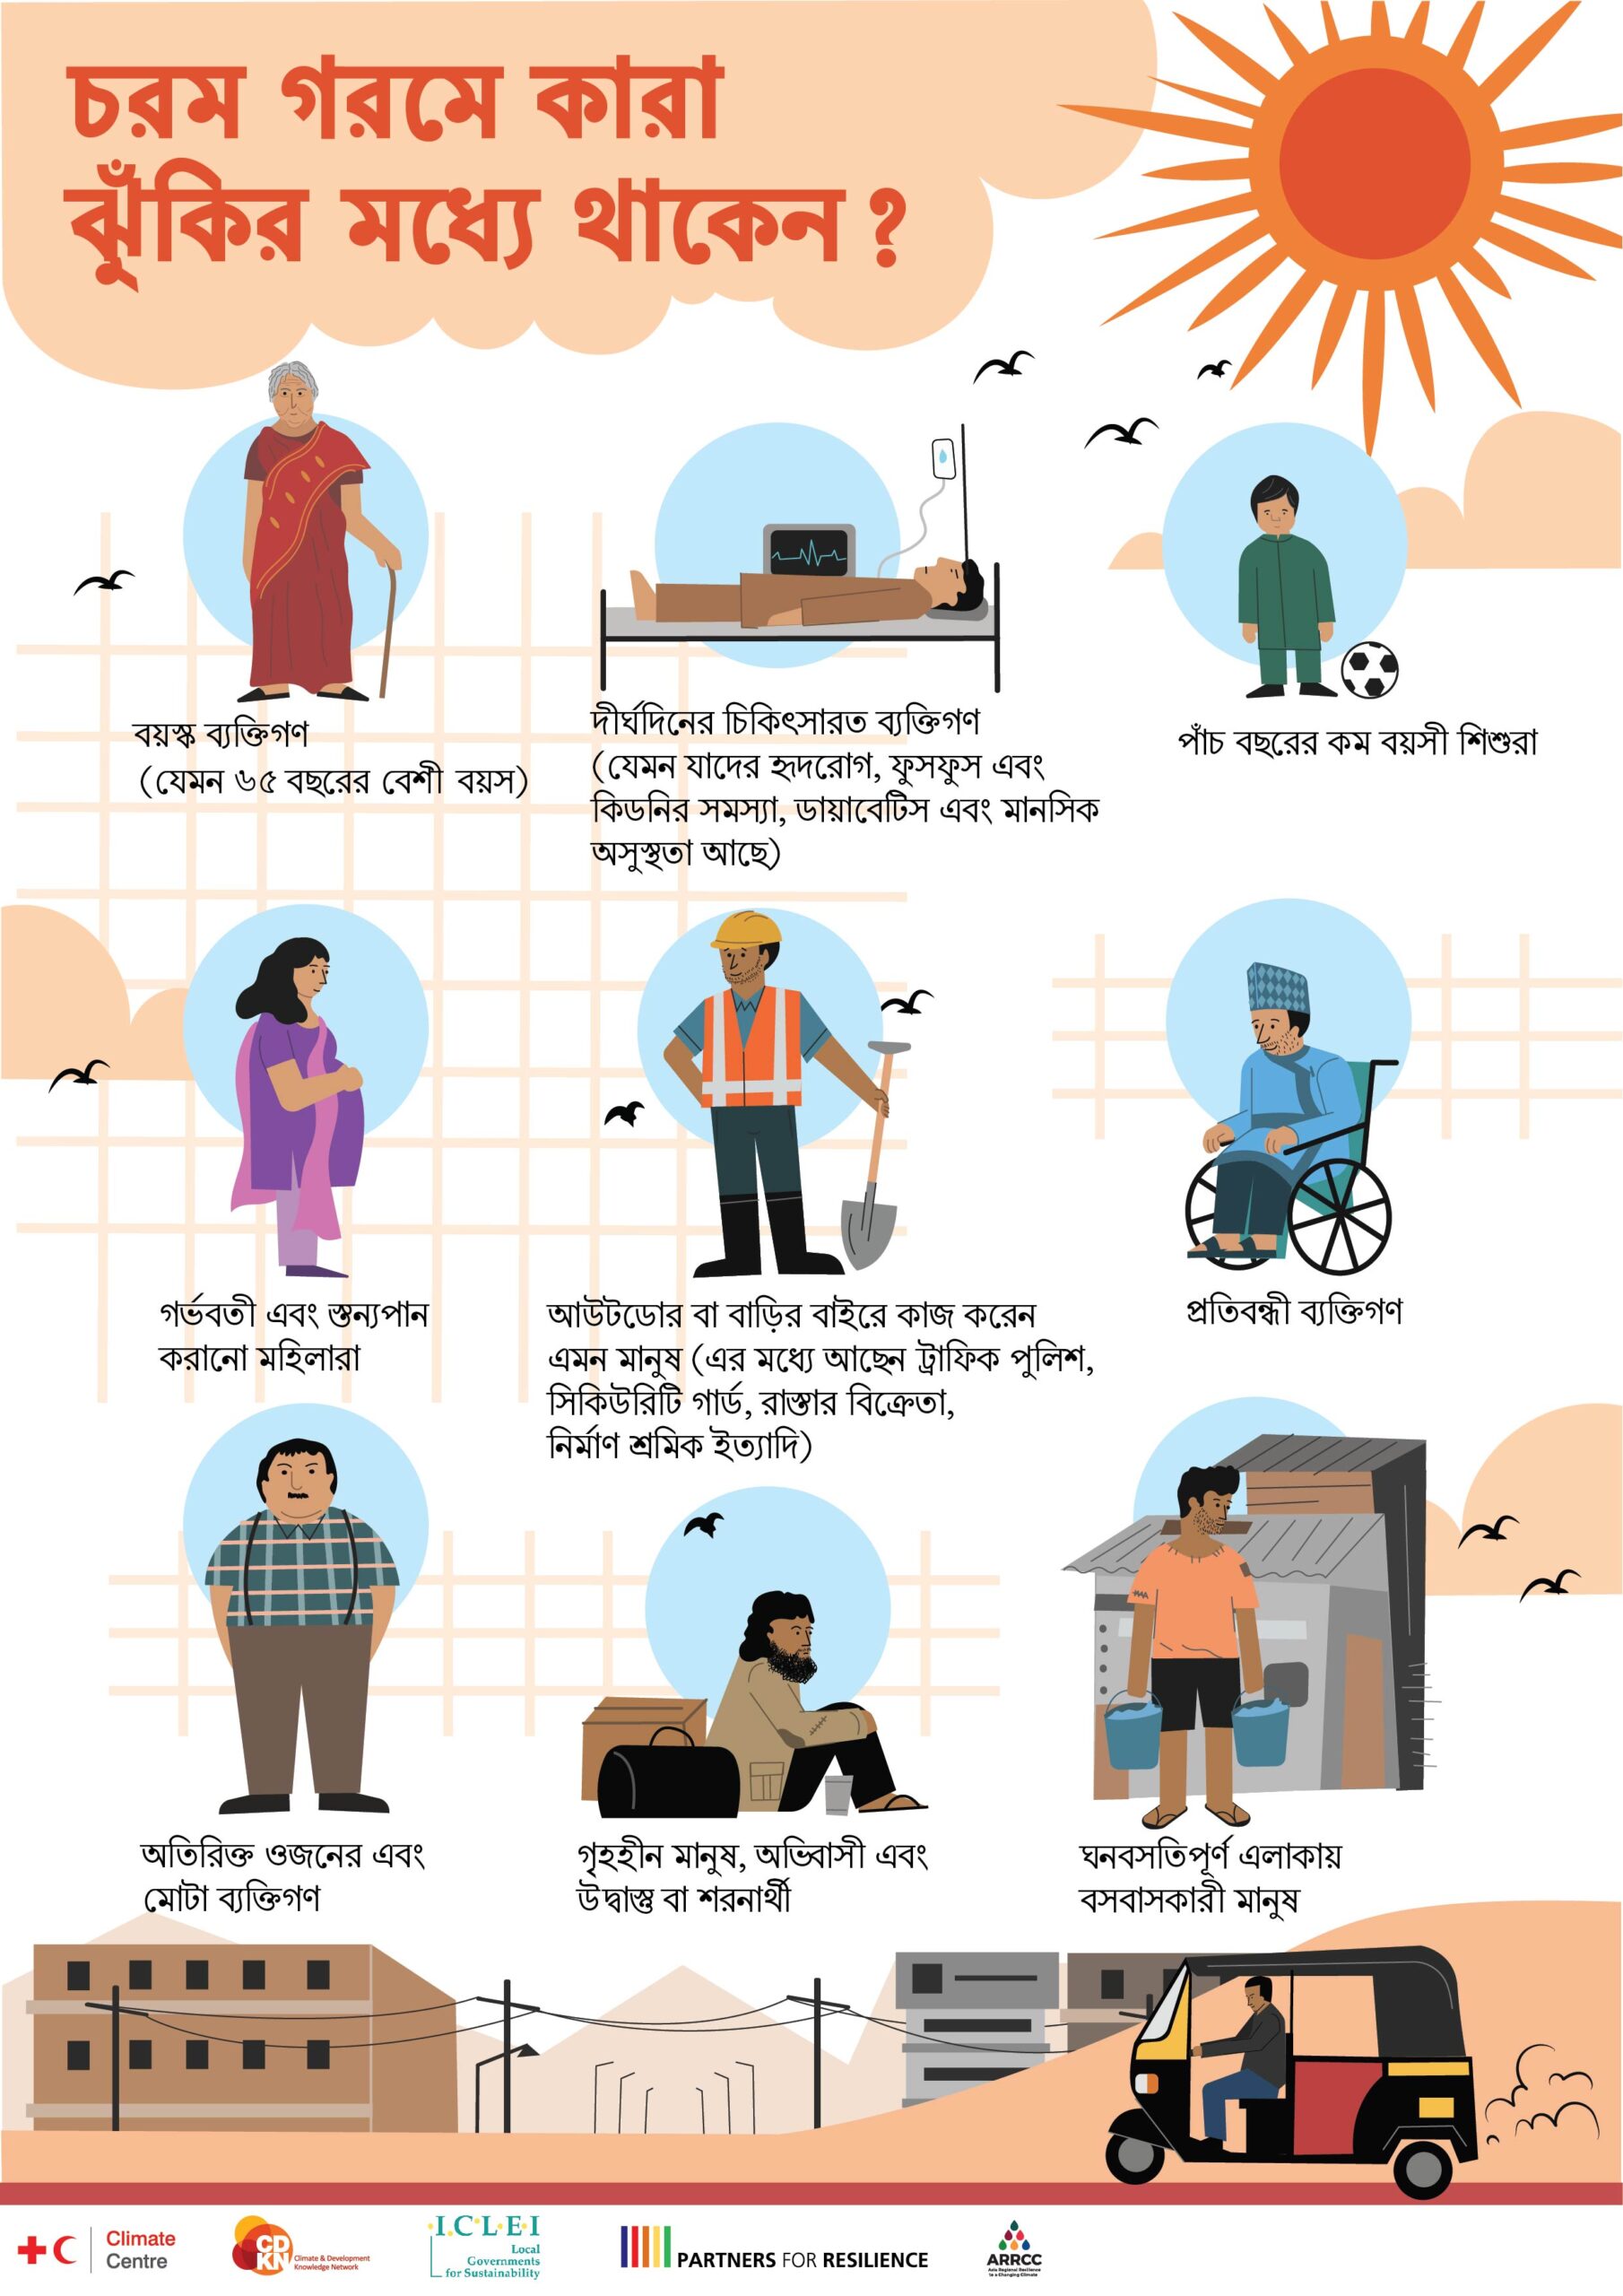 Bengali Who is at risk to extreme heat?